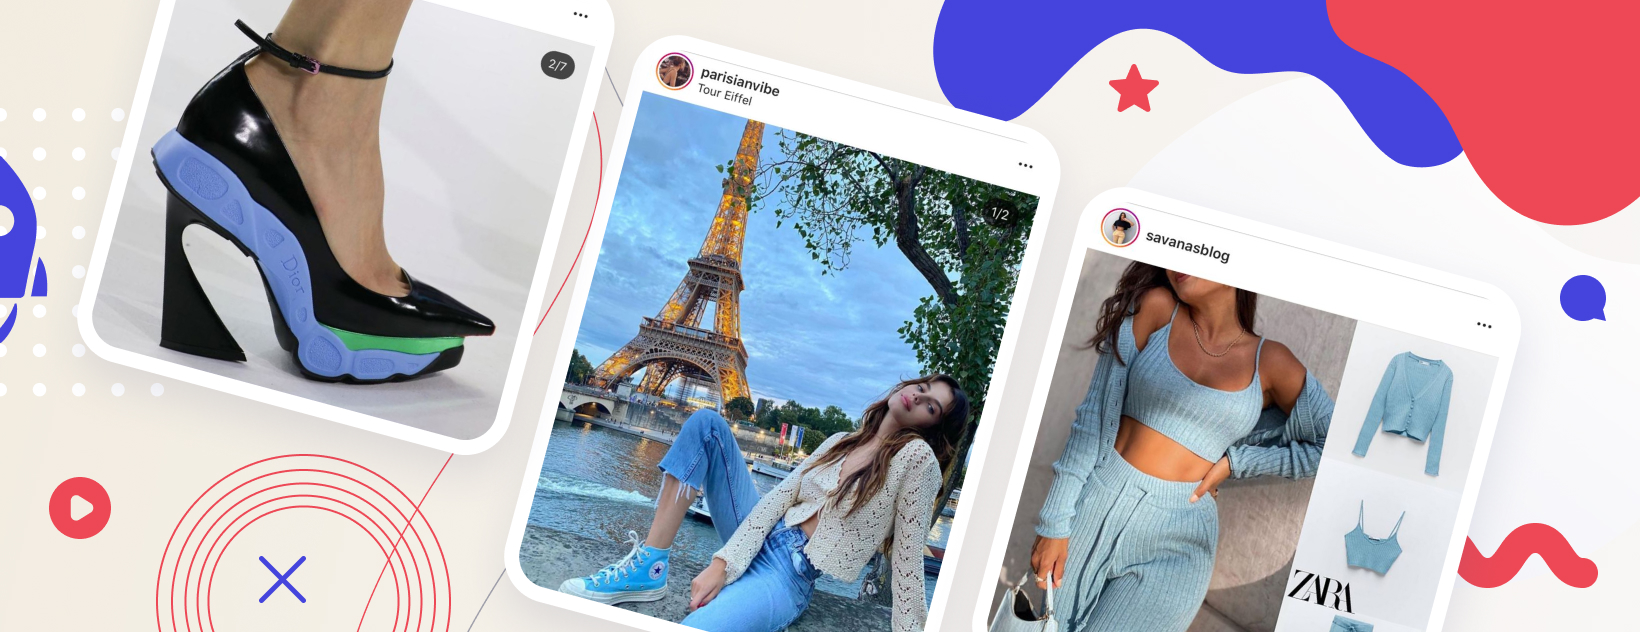 3 Instagram fashion influencers who influence without original photos (brilliant examples of content repurposing + takeaways)